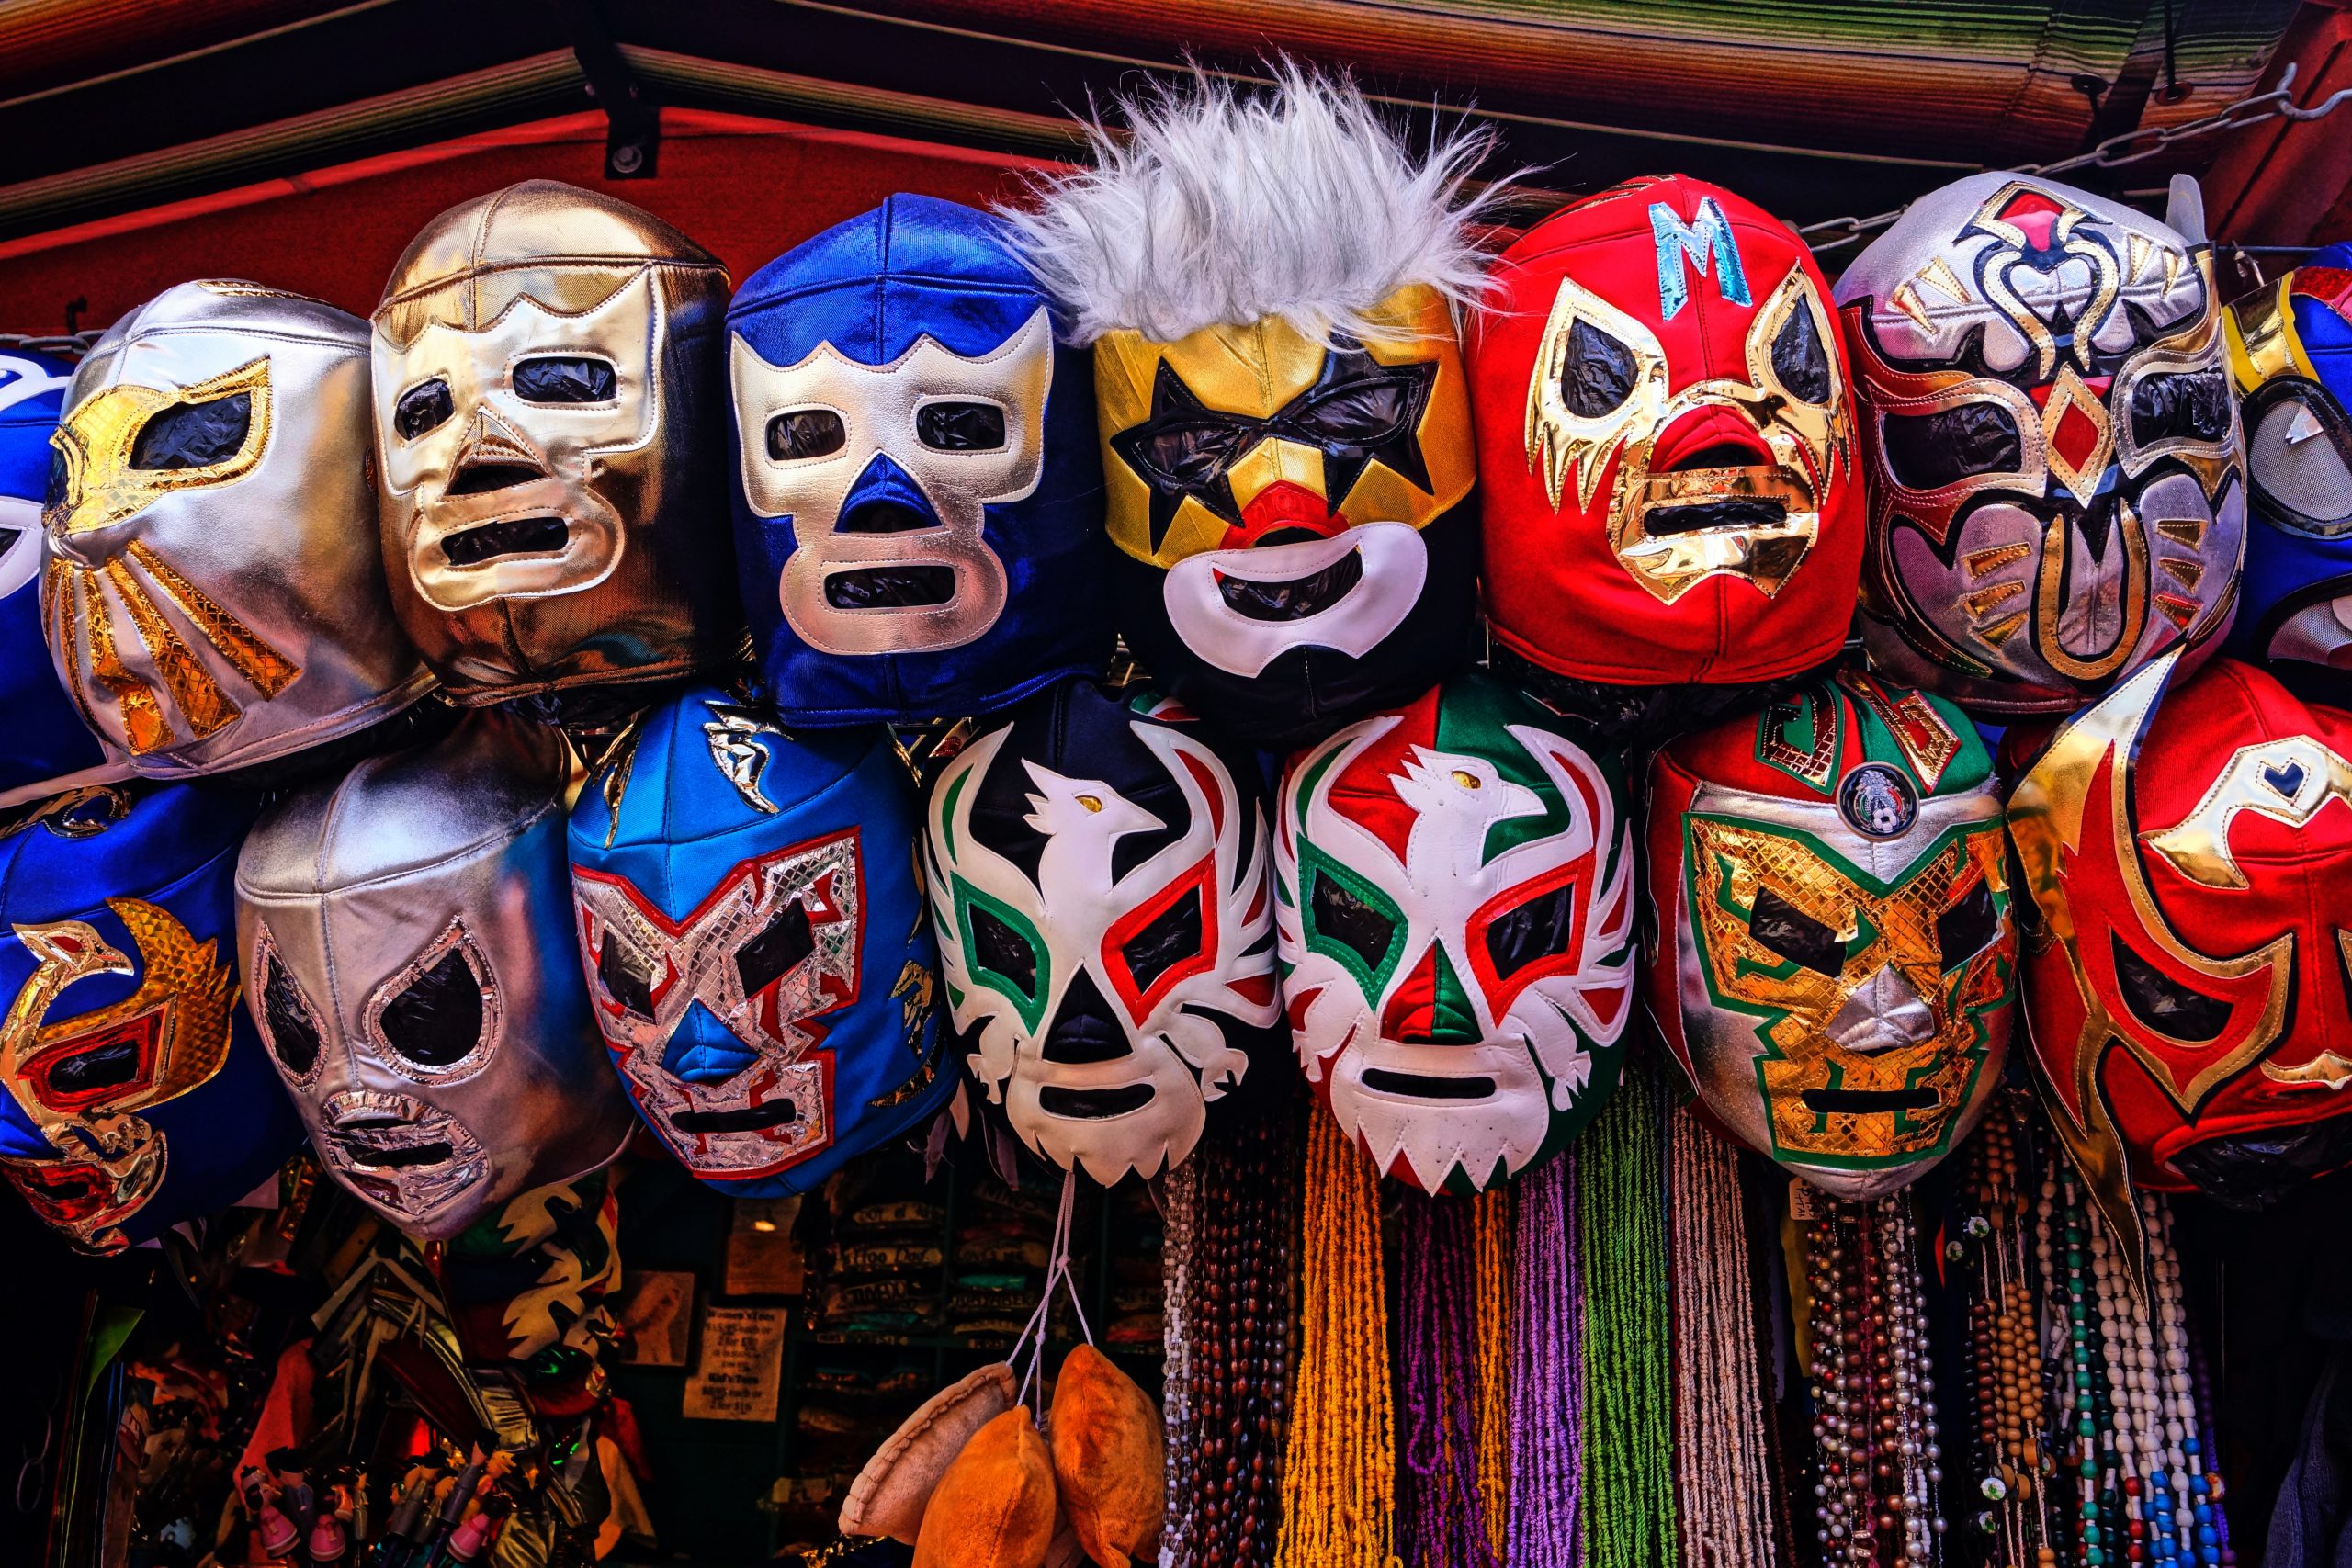 Colourful wrestling masks sold as mexican souvenirs